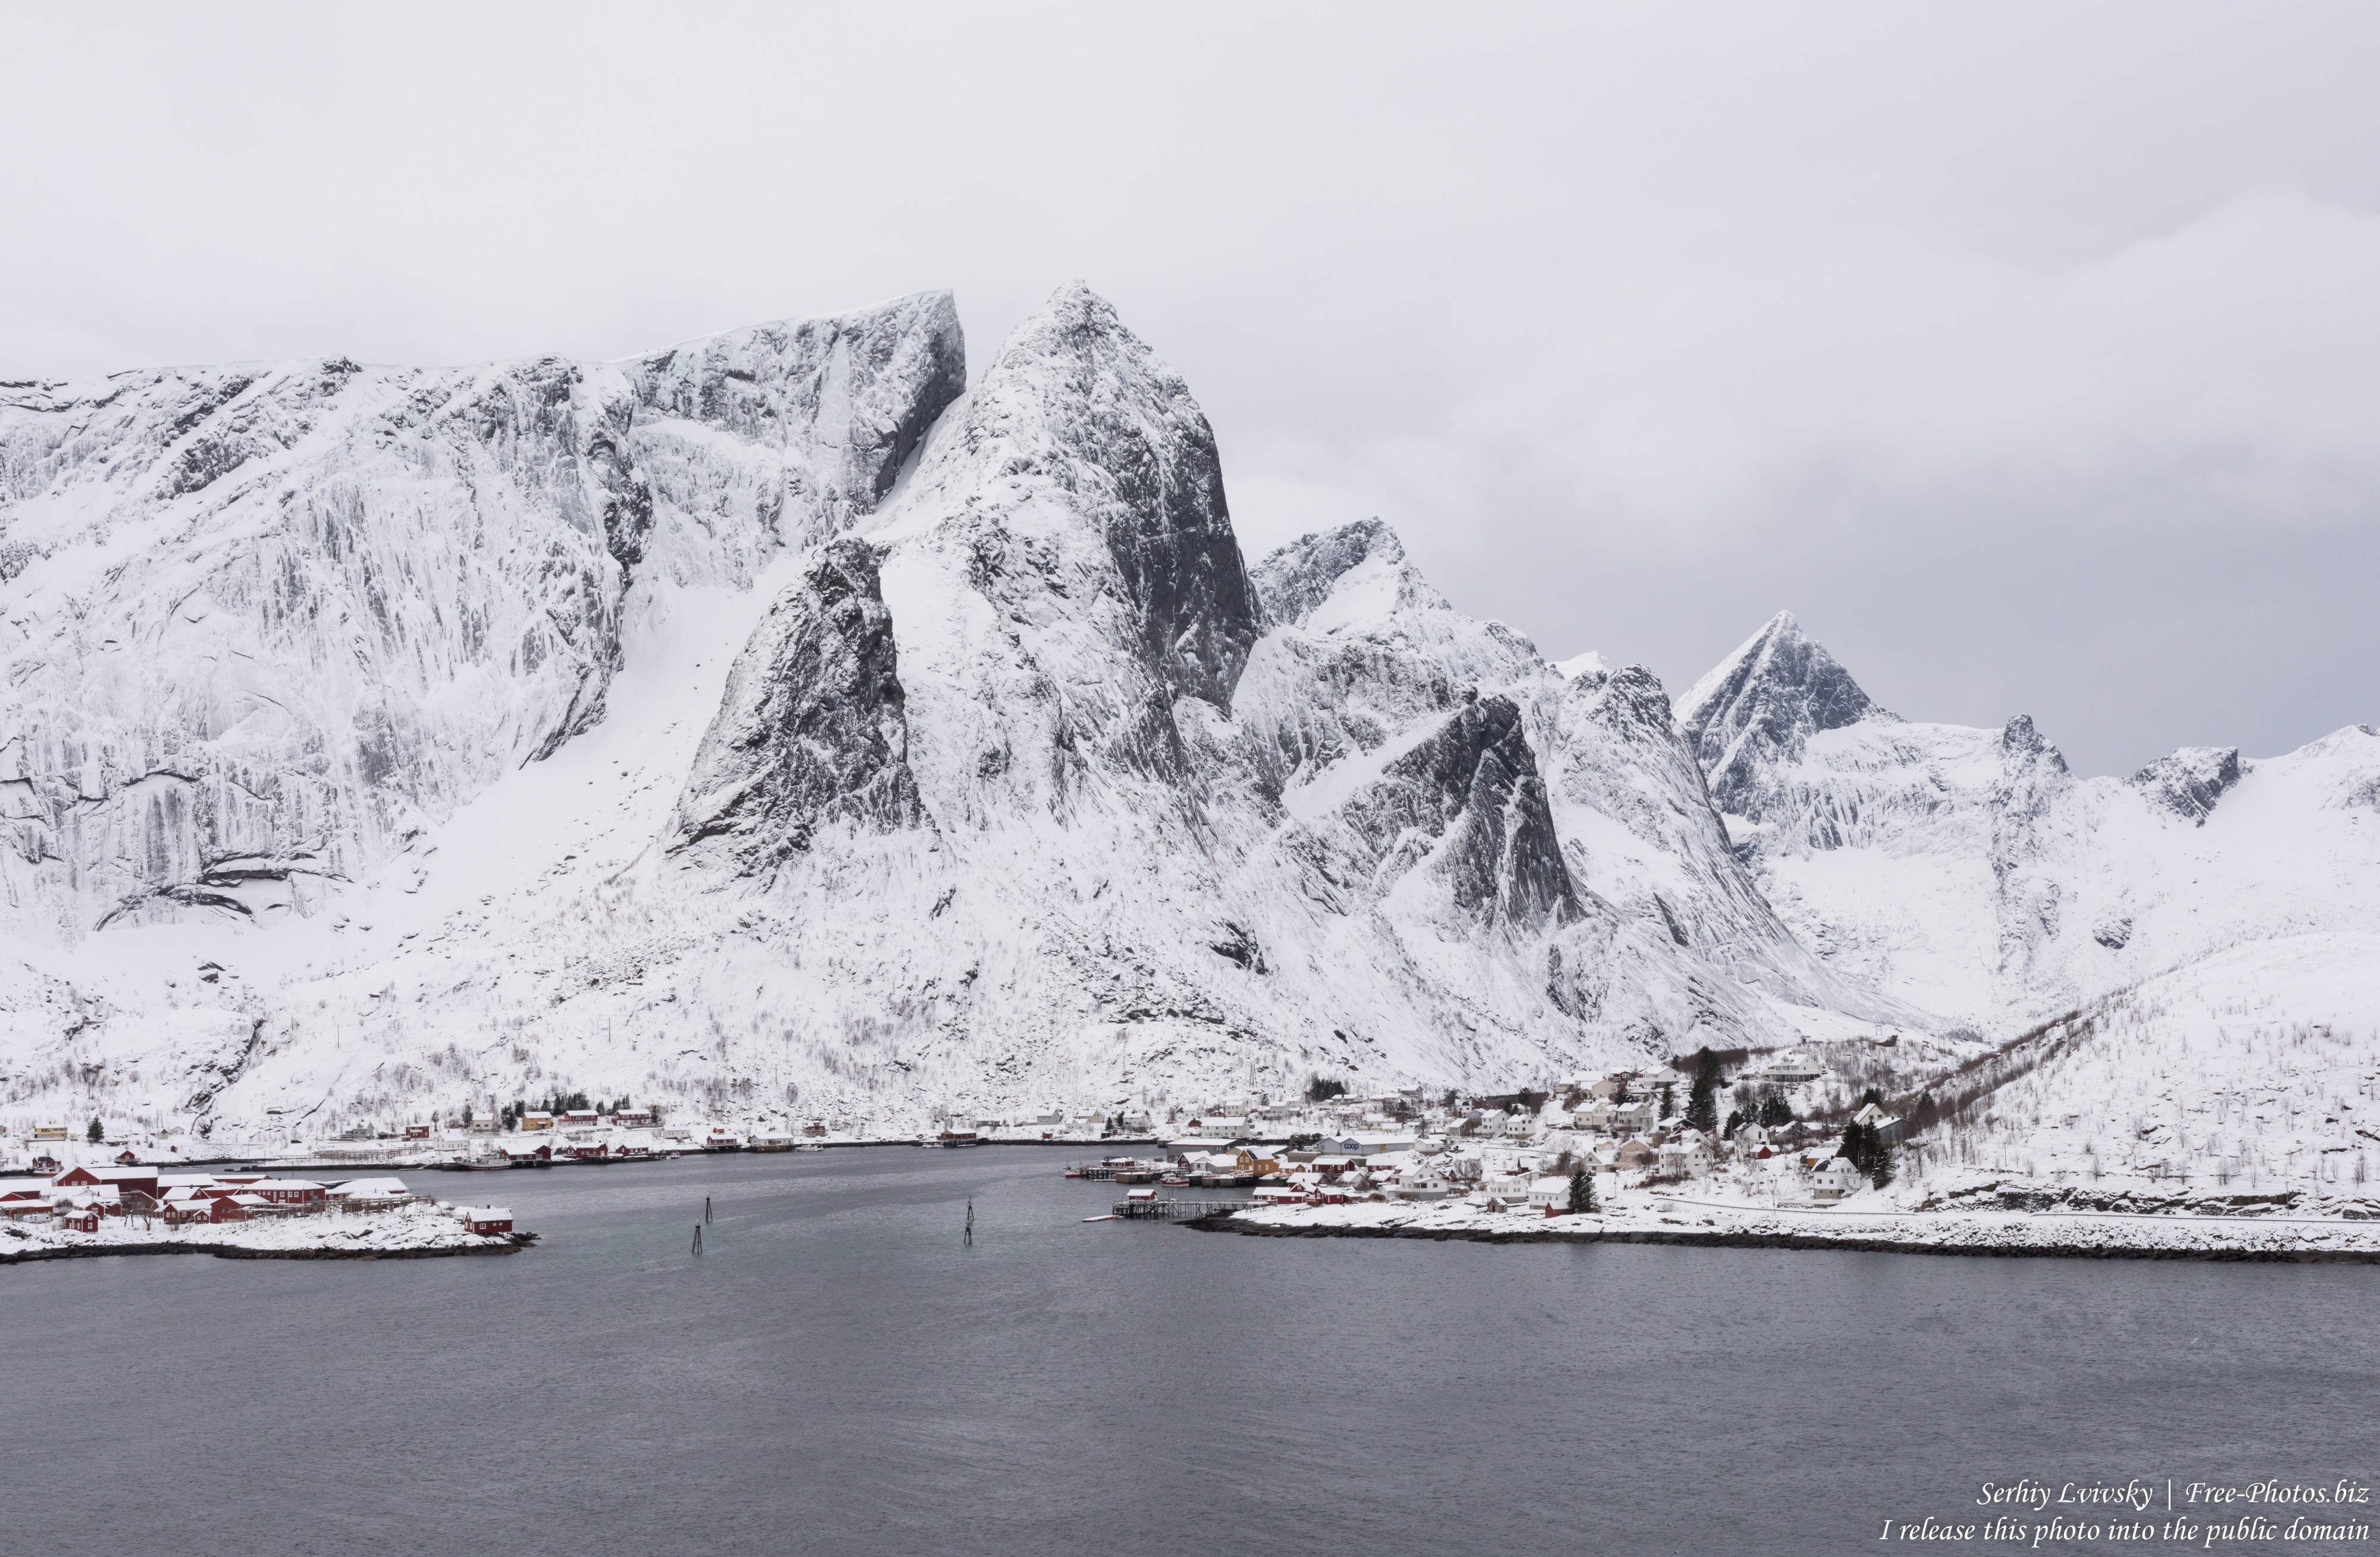 Sakrisoy and surroundings, Norway, in February 2020 by Serhiy Lvivsky, picture 8